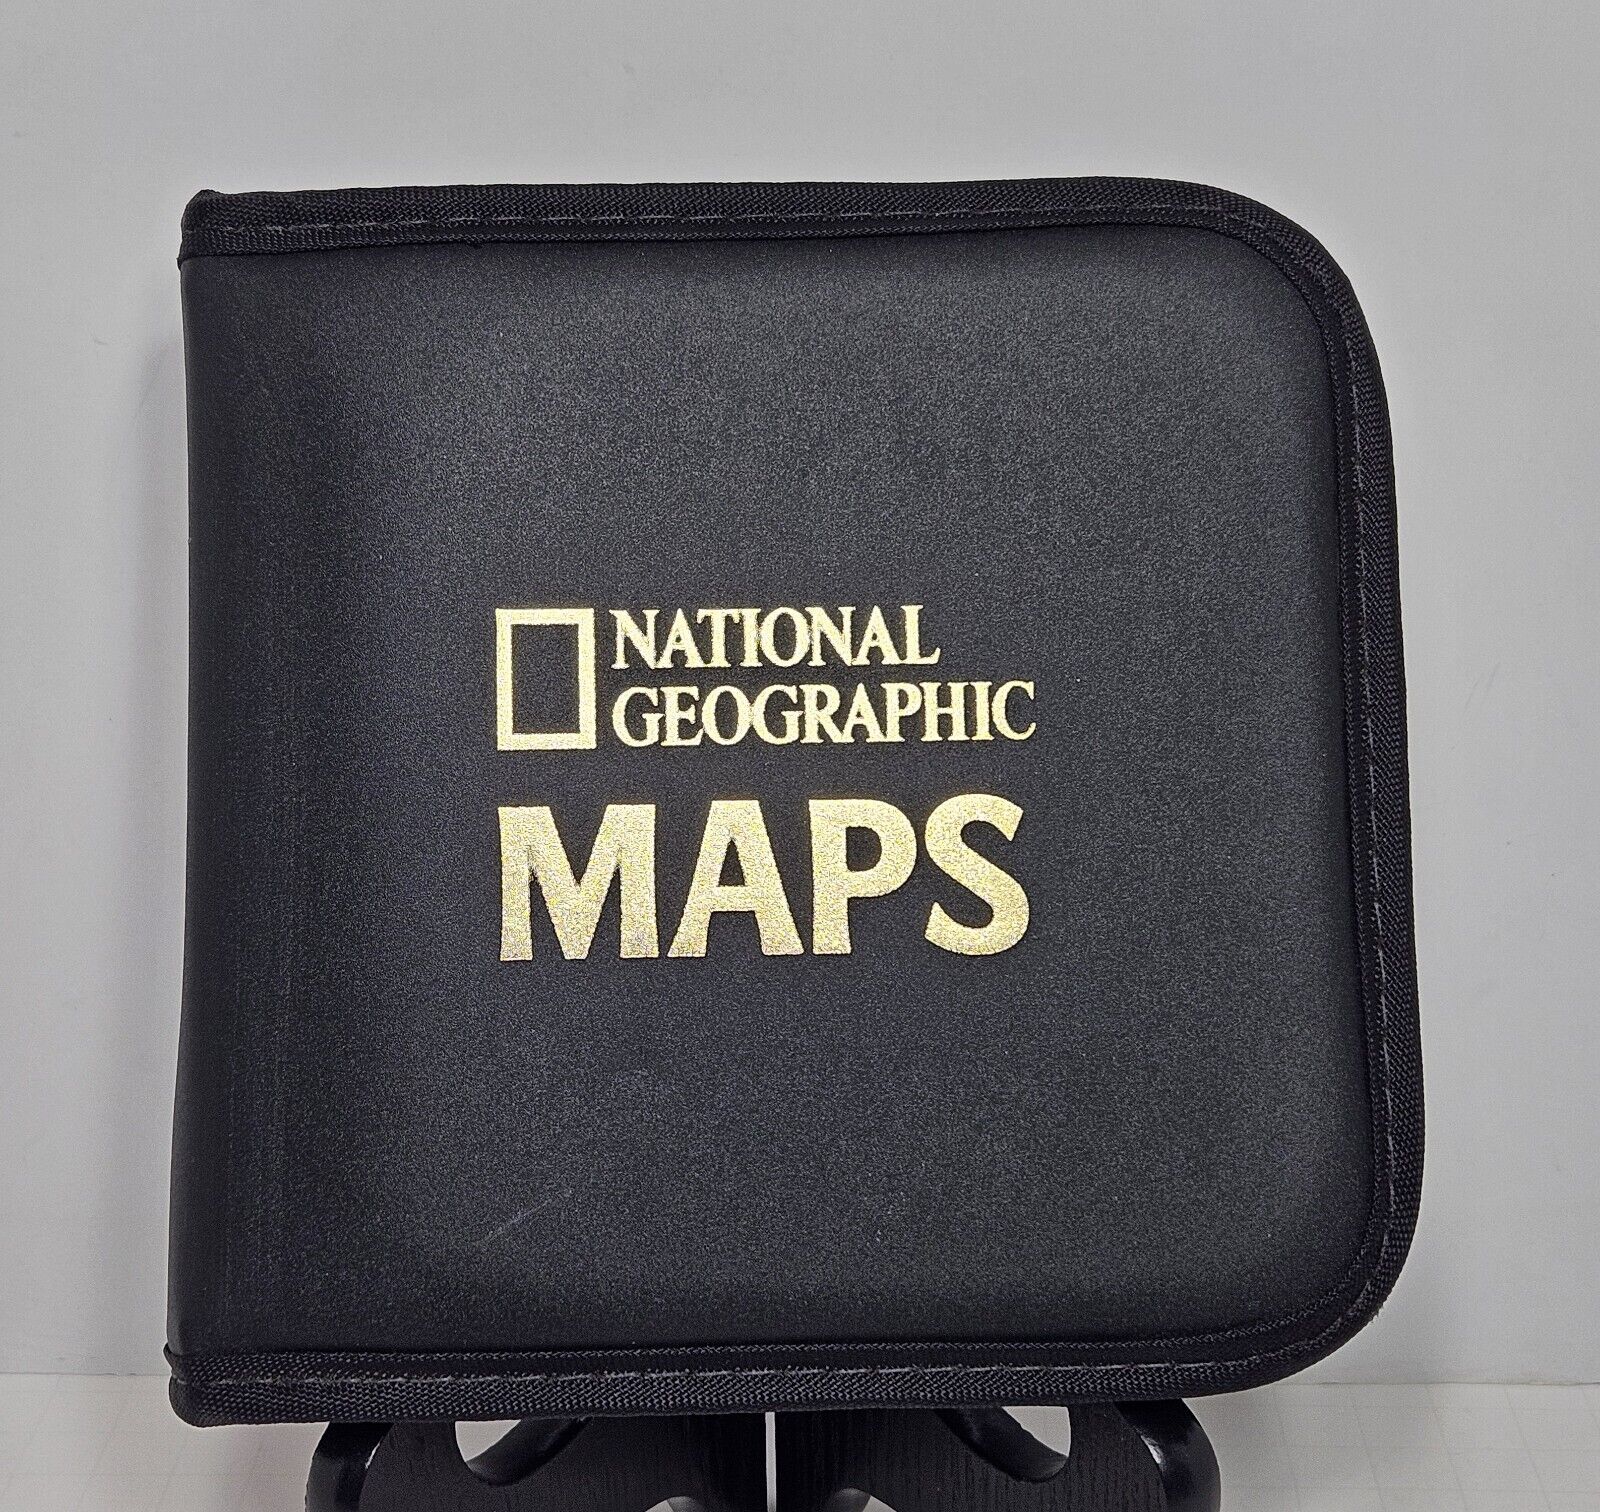 National Geographic Maps 8 Disc Set CD-ROM Windows 95/98 With Zip-Up Case